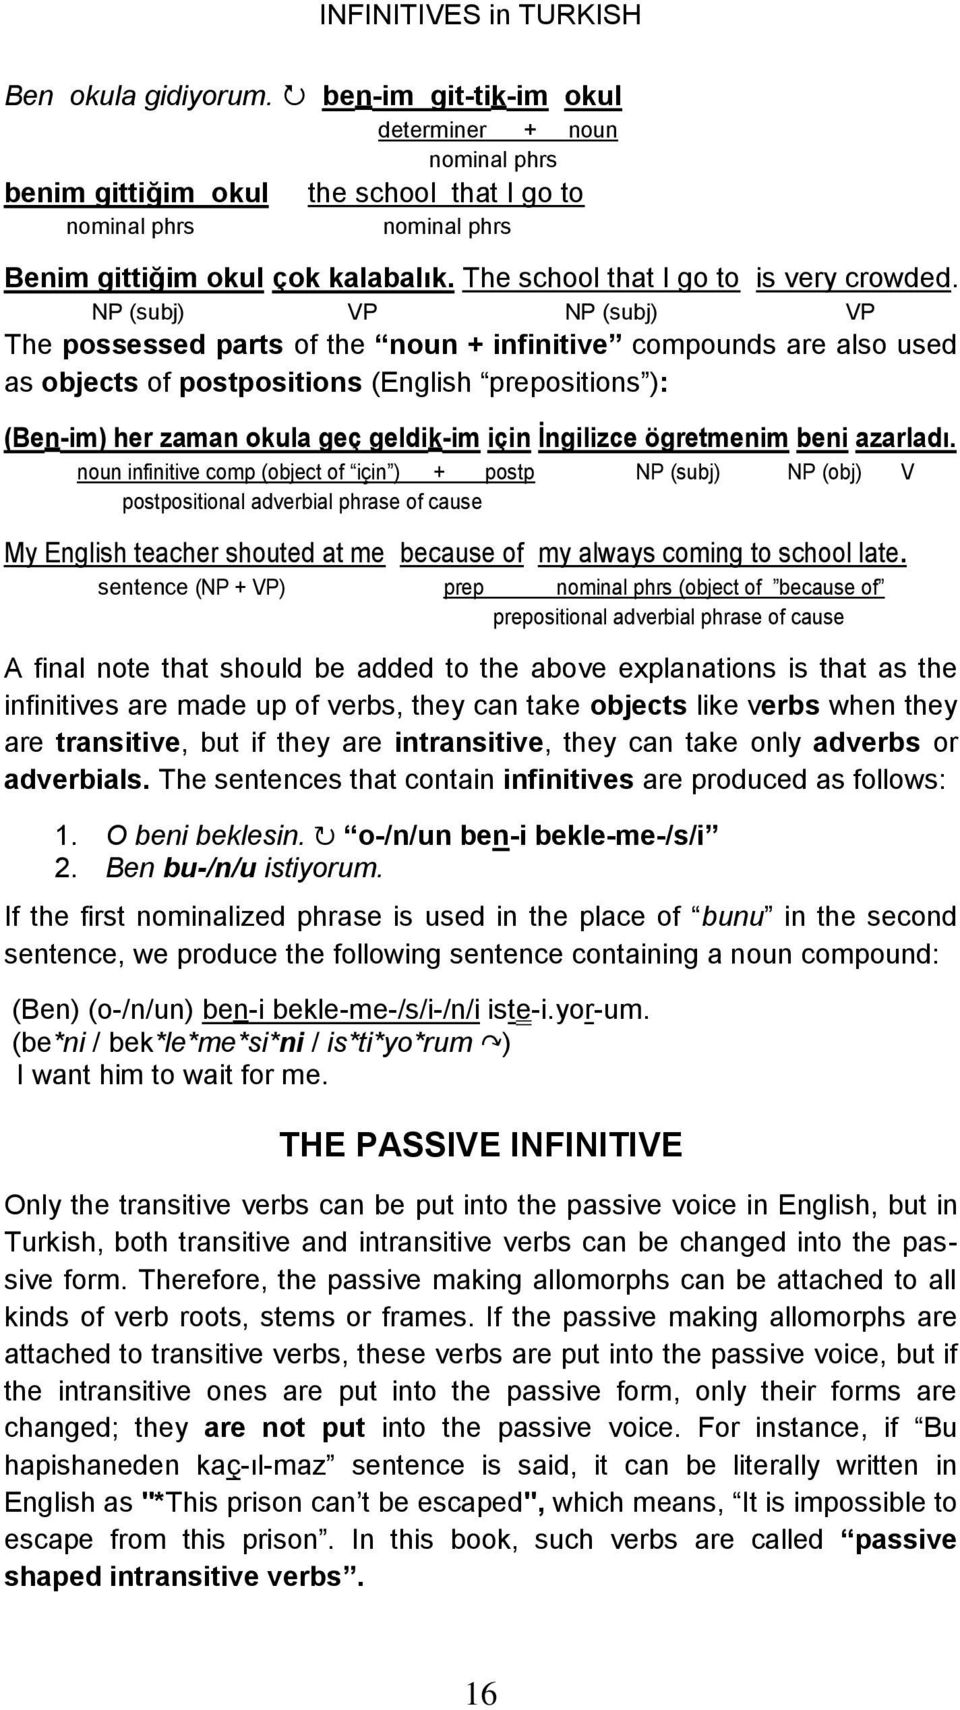 NP (subj) VP NP (subj) VP The possessed parts of the noun + infinitive compounds are also used as objects of postpositions (English prepositions ): (Ben-im) her zaman okula geç geldik-im için